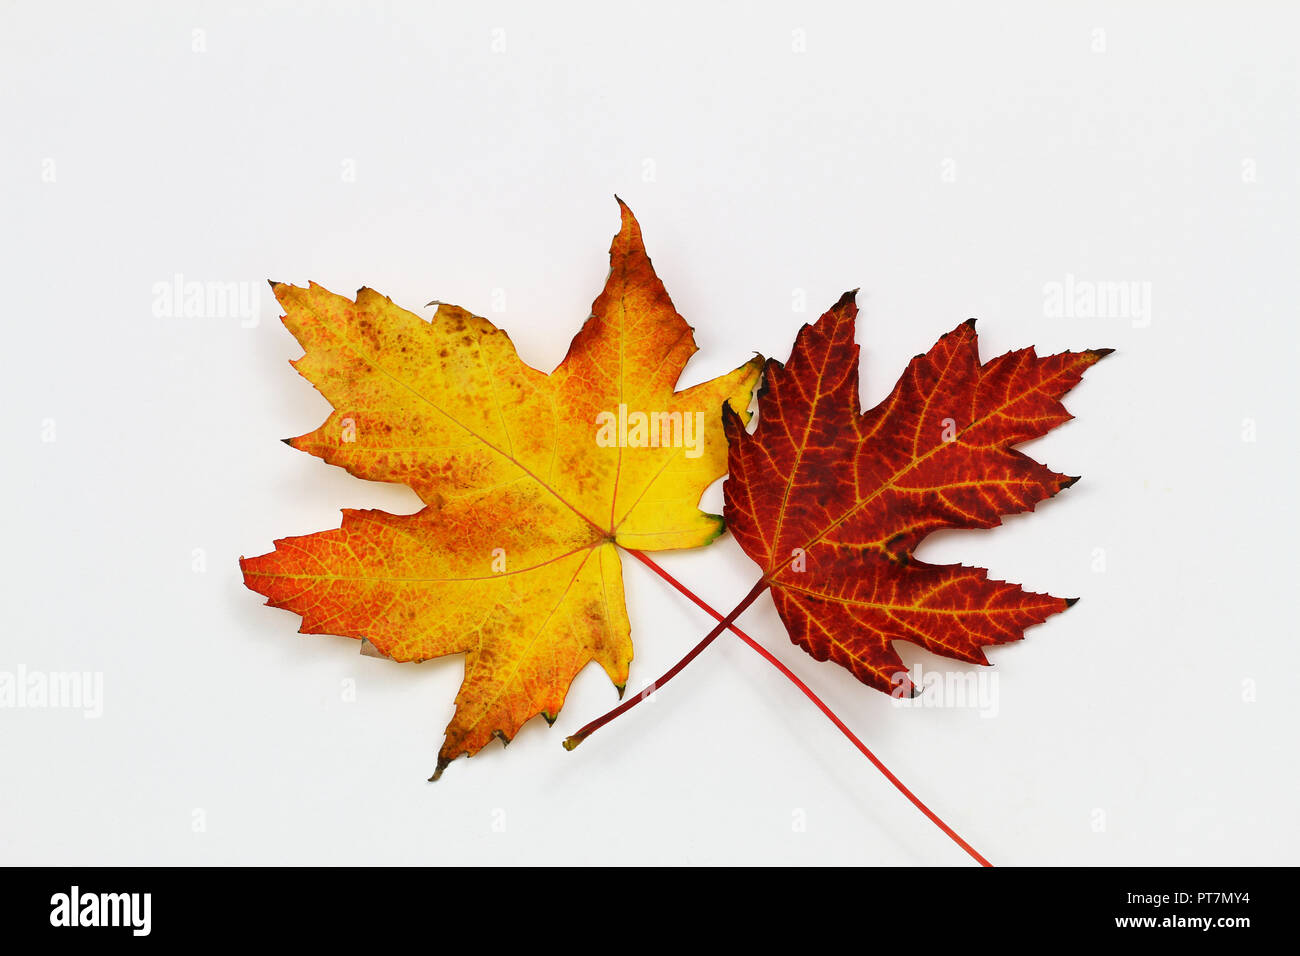 Two colorful autumn maple leaves on white background with copy space Stock Photo